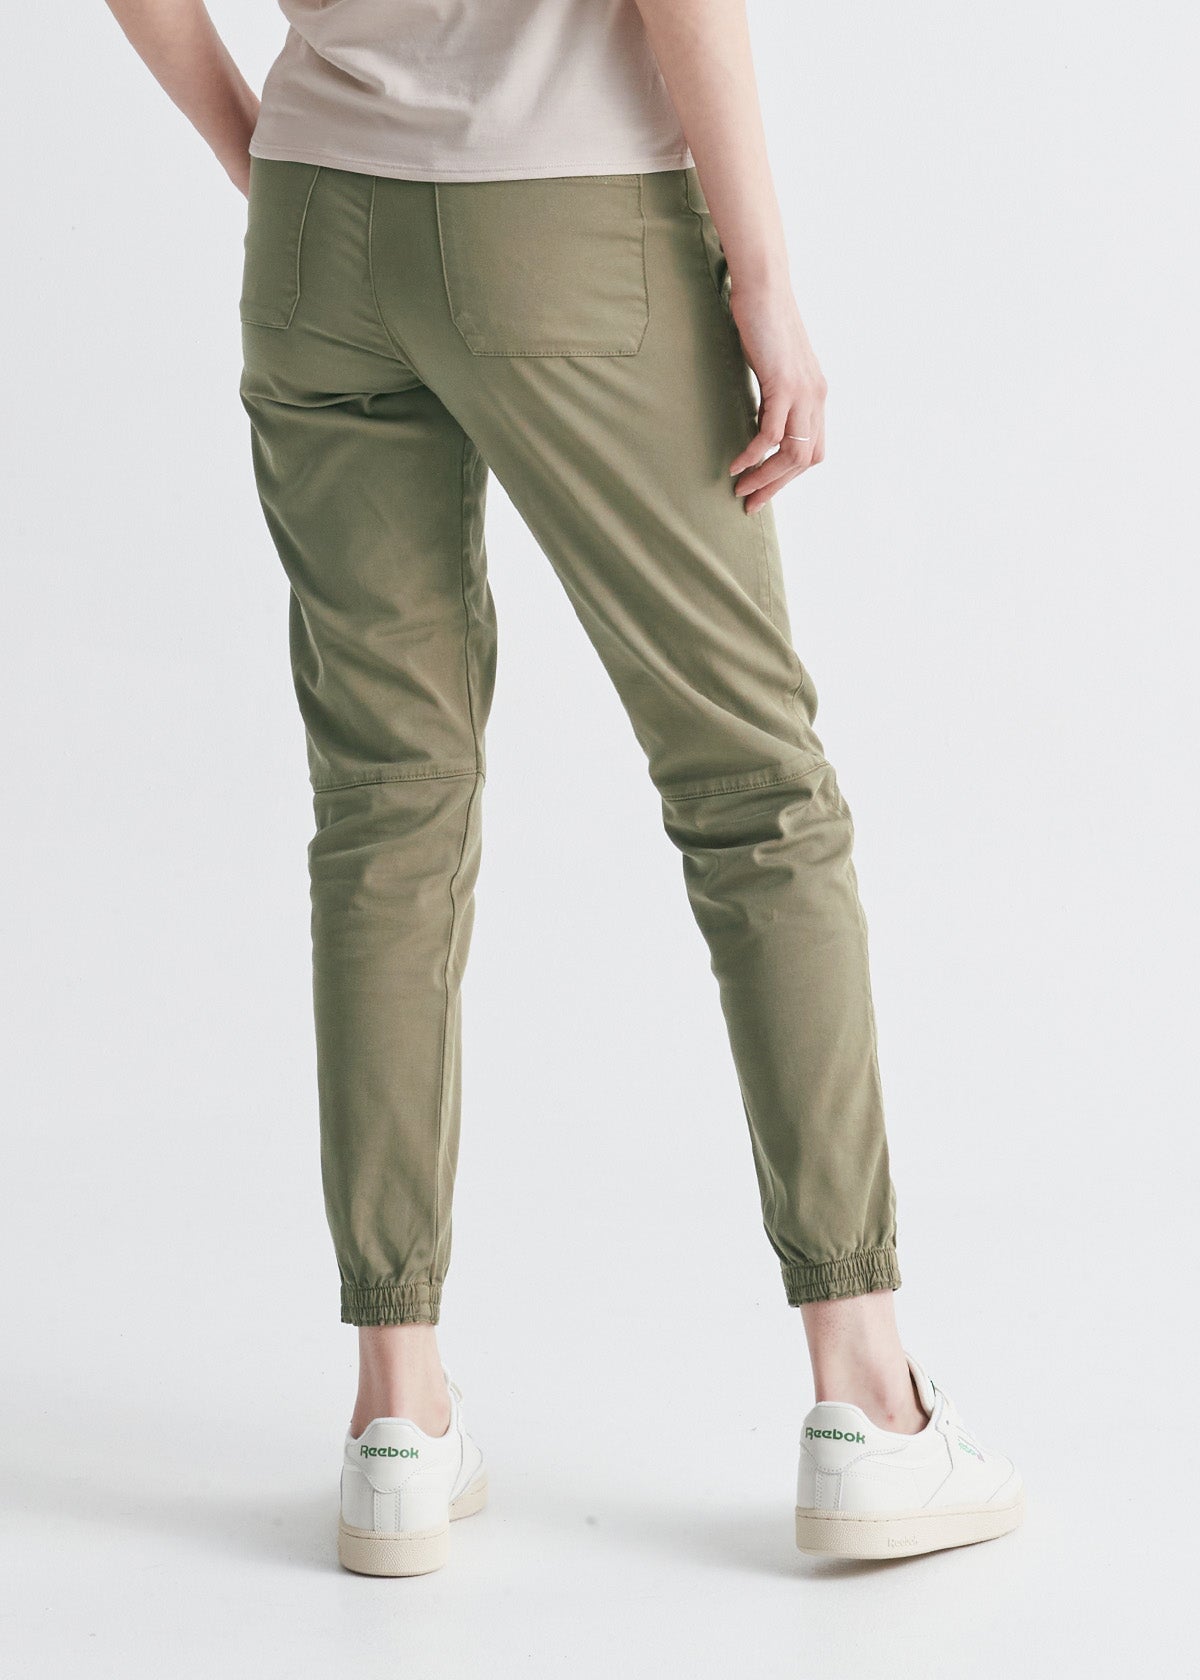  All in Motion Women's High-Rise Ribbed Jogger Pants